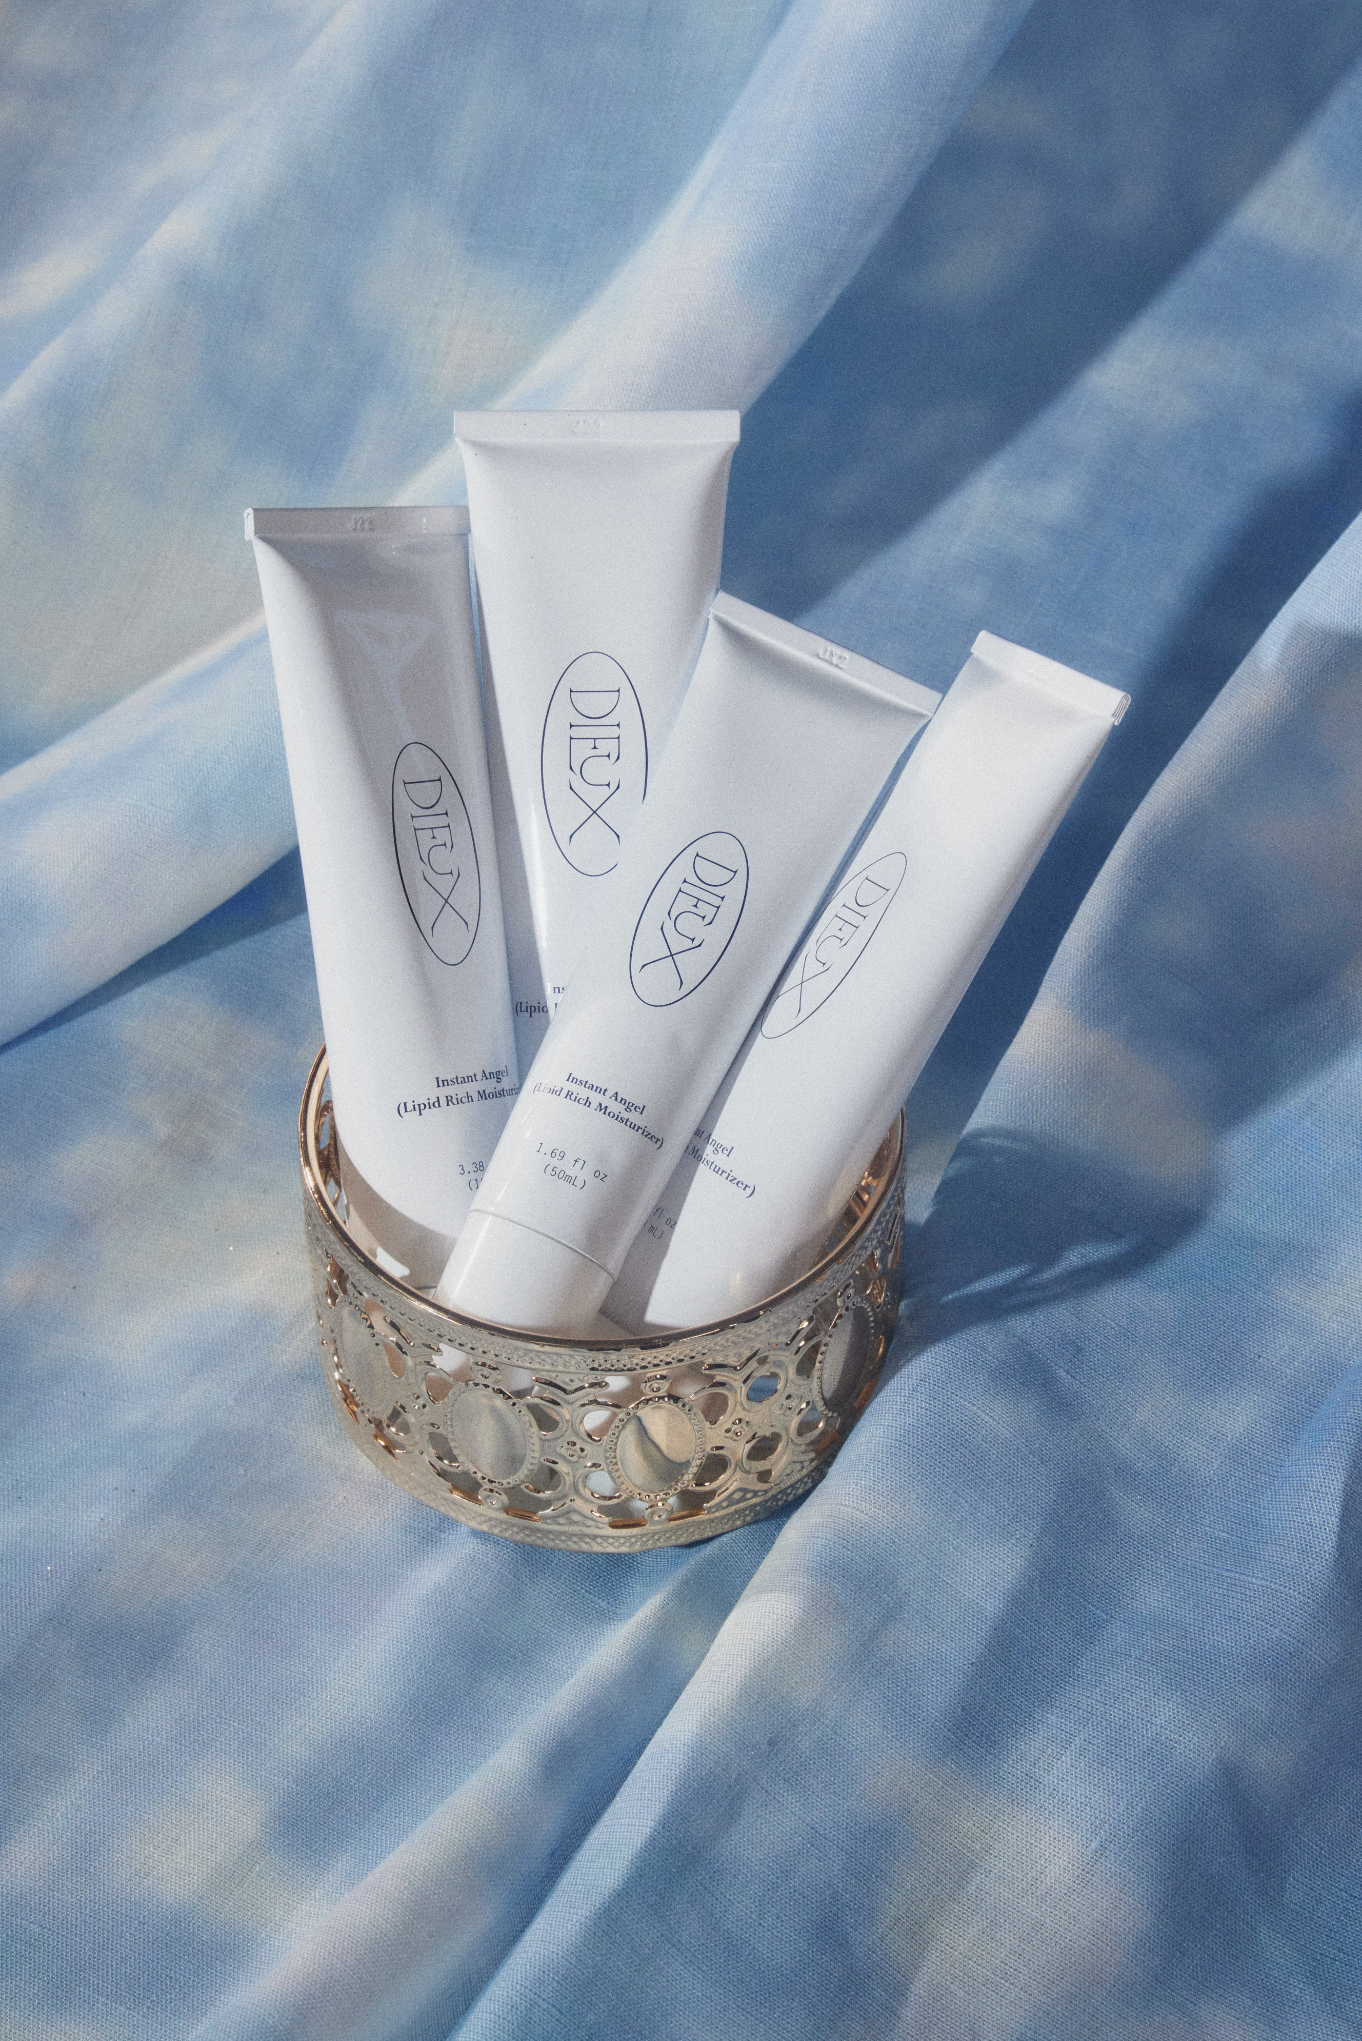 Five skincare tubes in a decorative holder on a patterned fabric